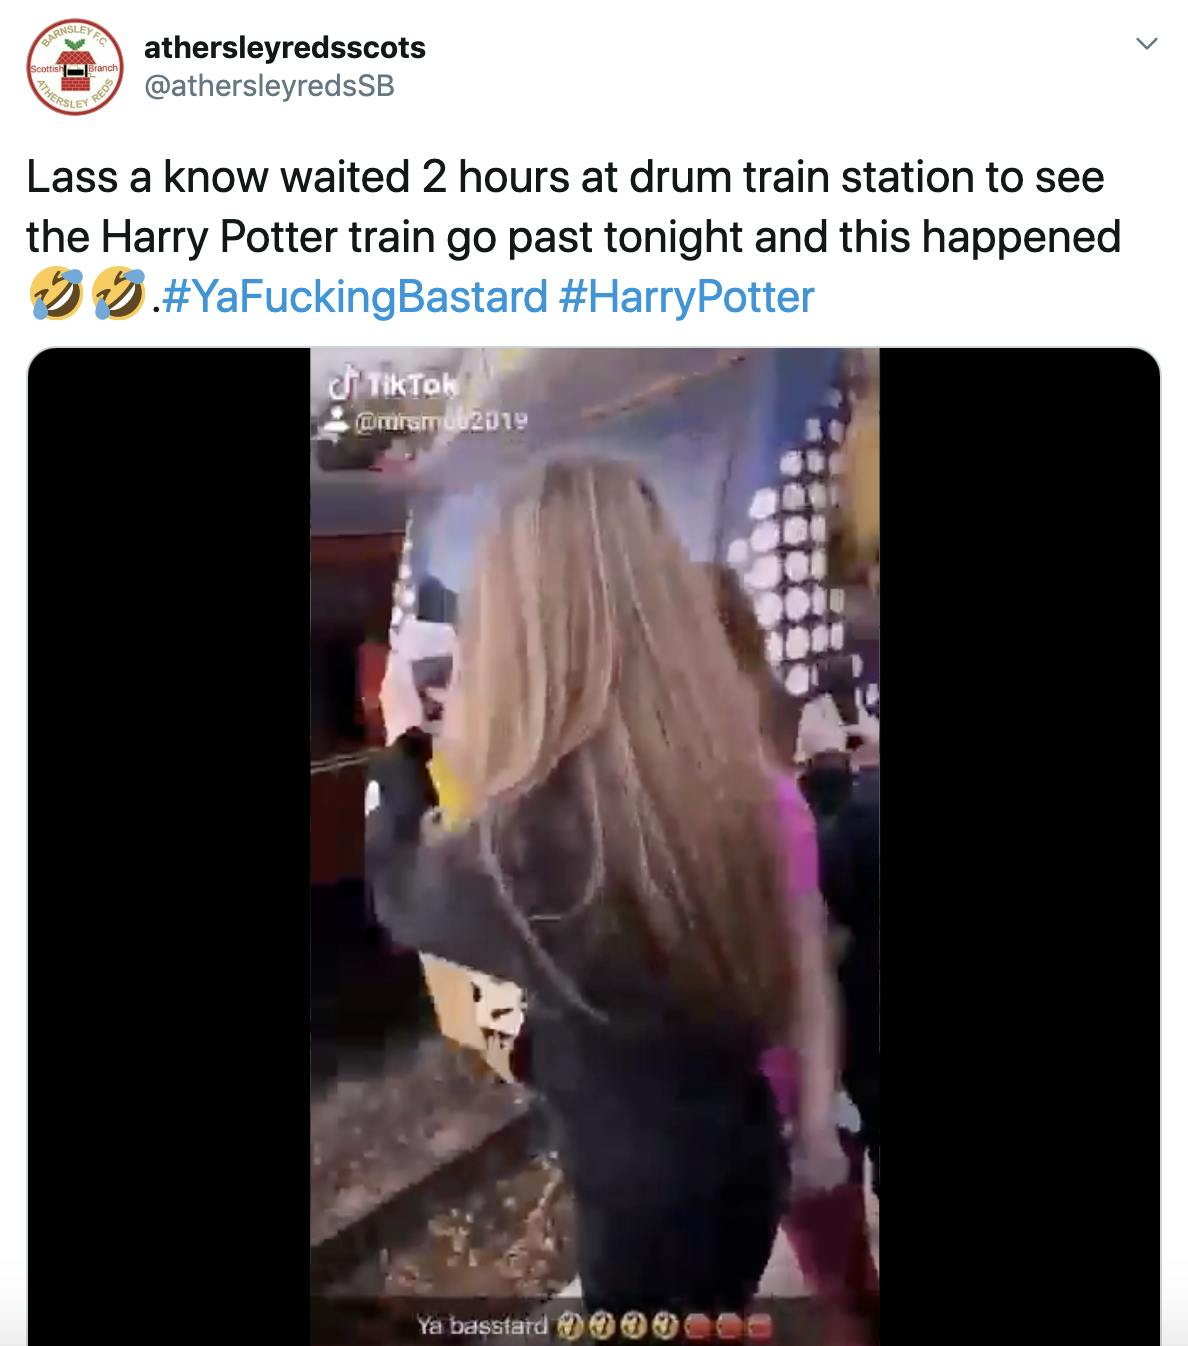 "Lass a know waited 2 hours at drum train station to see the Harry Potter train go past tonight and this happened Rolling on the floor laughingRolling on the floor laughing.#YaFuckingBastard #HarryPotter" embedded tiktok shared above